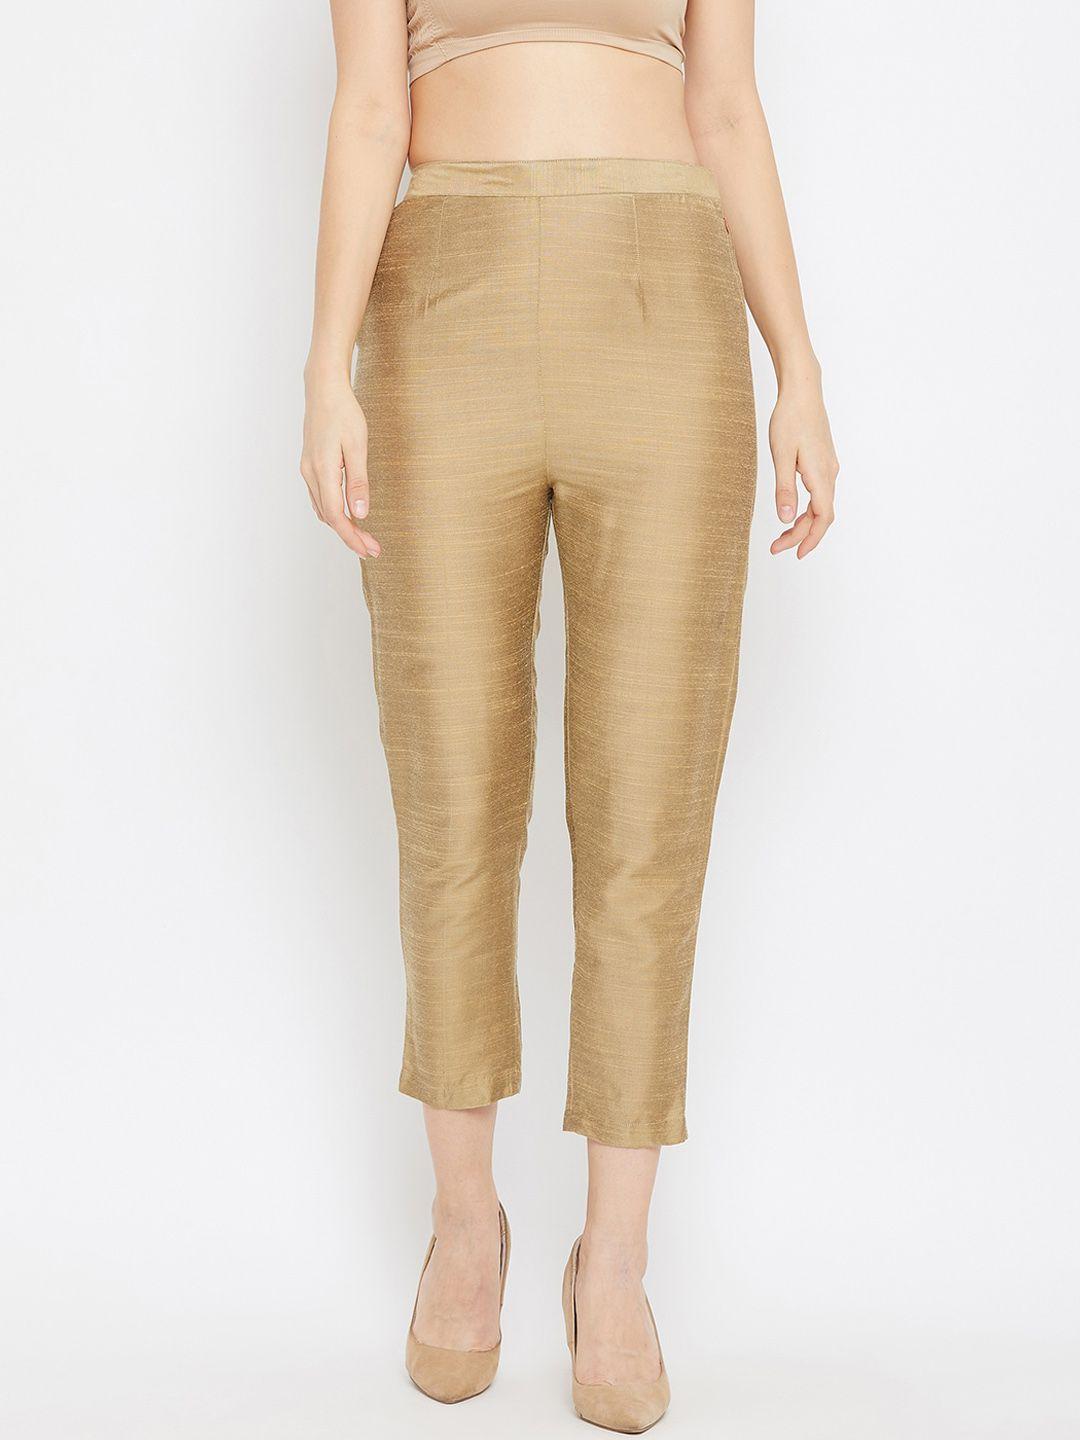 clora creation women gold-toned cropped smart trousers